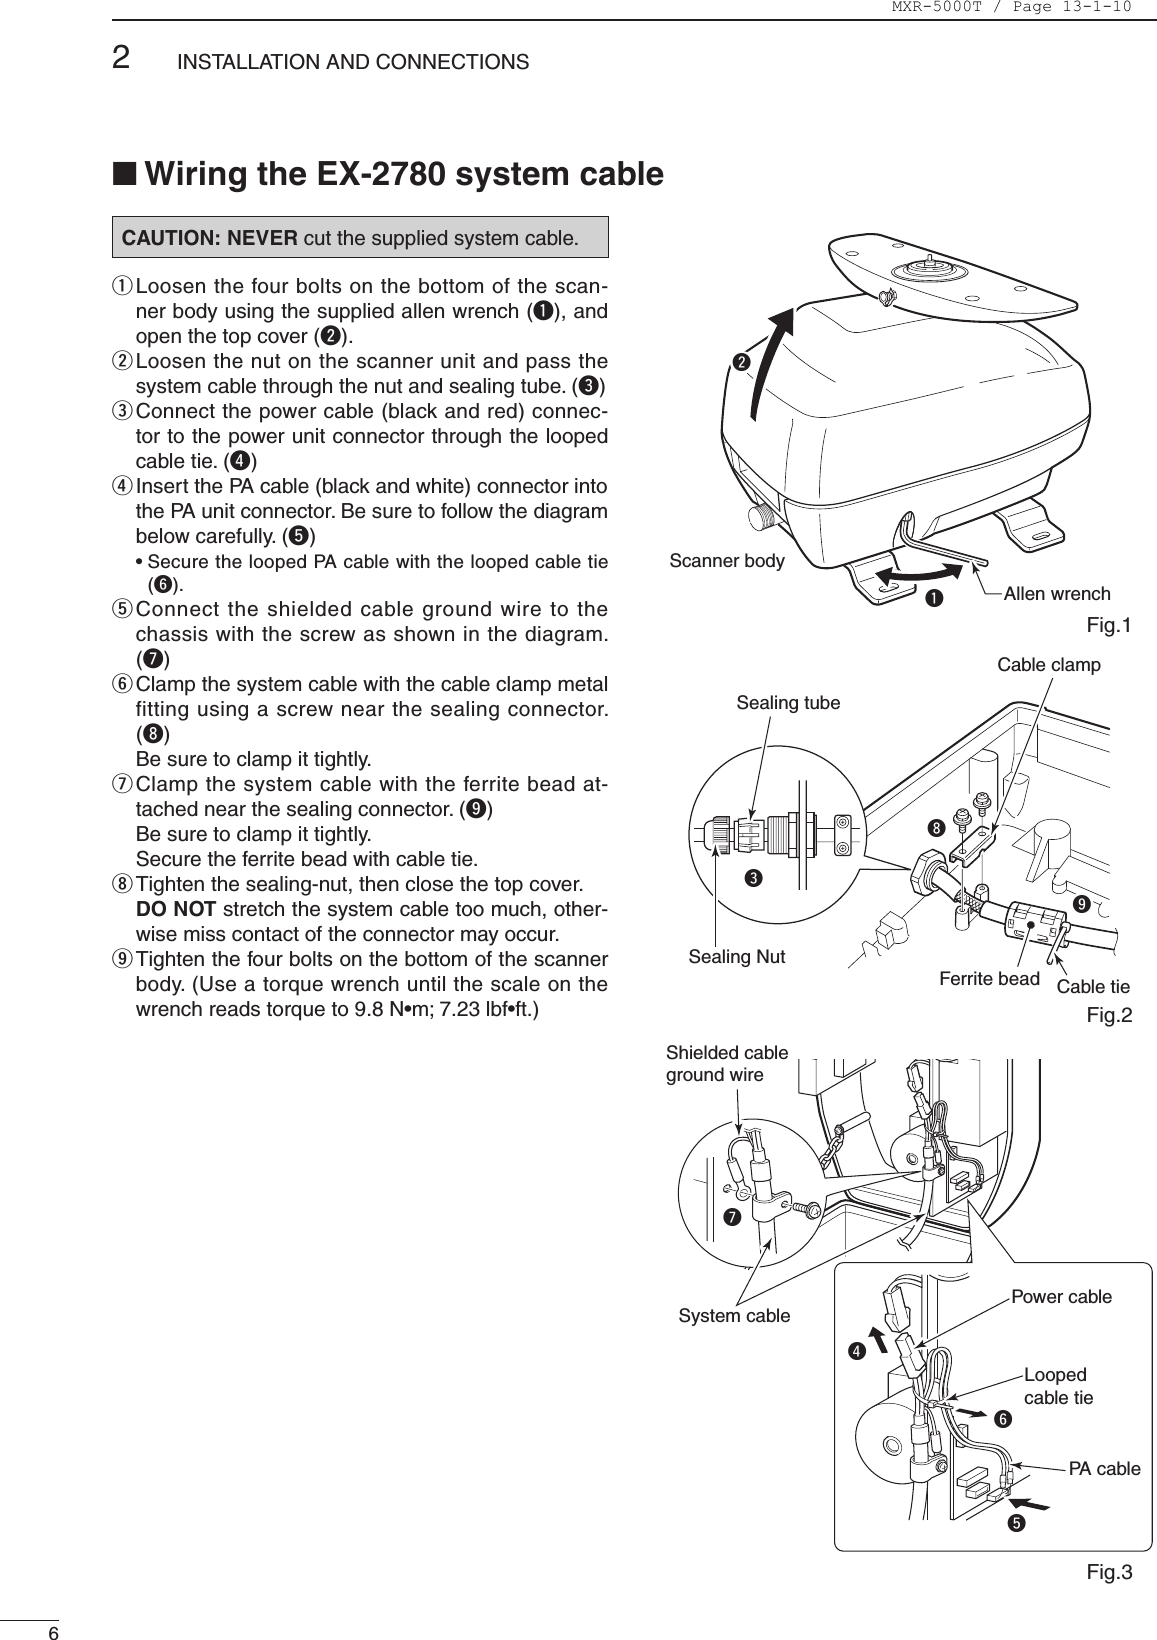 CAUTION: NEVER cut the supplied system cable.q  Loosen the four bolts on the bottom of the scan-ner body using the supplied allen wrench (q), and open the top cover (w).w  Loosen the nut on the scanner unit and pass the system cable through the nut and sealing tube. (e)e  Connect the power cable (black and red) connec-tor to the power unit connector through the looped cable tie. (r)r  Insert the PA cable (black and white) connector into the PA unit connector. Be sure to follow the diagram below carefully. (t)  •  Secure the looped PA cable with the looped cable tie (y).t  Connect the shielded cable ground wire to the chassis with the screw as shown in the diagram. (u)y  Clamp the system cable with the cable clamp metal fitting using a screw near the sealing connector. (i)  Be sure to clamp it tightly.u  Clamp the system cable with the ferrite bead at-tached near the sealing connector. (o)  Be sure to clamp it tightly.  Secure the ferrite bead with cable tie.i  Tighten the sealing-nut, then close the top cover.  DO NOT stretch the system cable too much, other-wise miss contact of the connector may occur.o  Tighten the four bolts on the bottom of the scanner body. (Use a torque wrench until the scale on the wrench reads torque to 9.8 N•m; 7.23 lbf•ft.)Allen wrenchScanner bodyqwFerrite bead Cable tieCable clampioSealing tubeSealing NuteShielded cableground wireSystem cableurtLoopedcable tiePower cablePA  cabley■ Wiring the EX-2780 system cableFig.1Fig.2Fig.362INSTALLATION AND CONNECTIONSMXR-5000T / Page 13-1-10